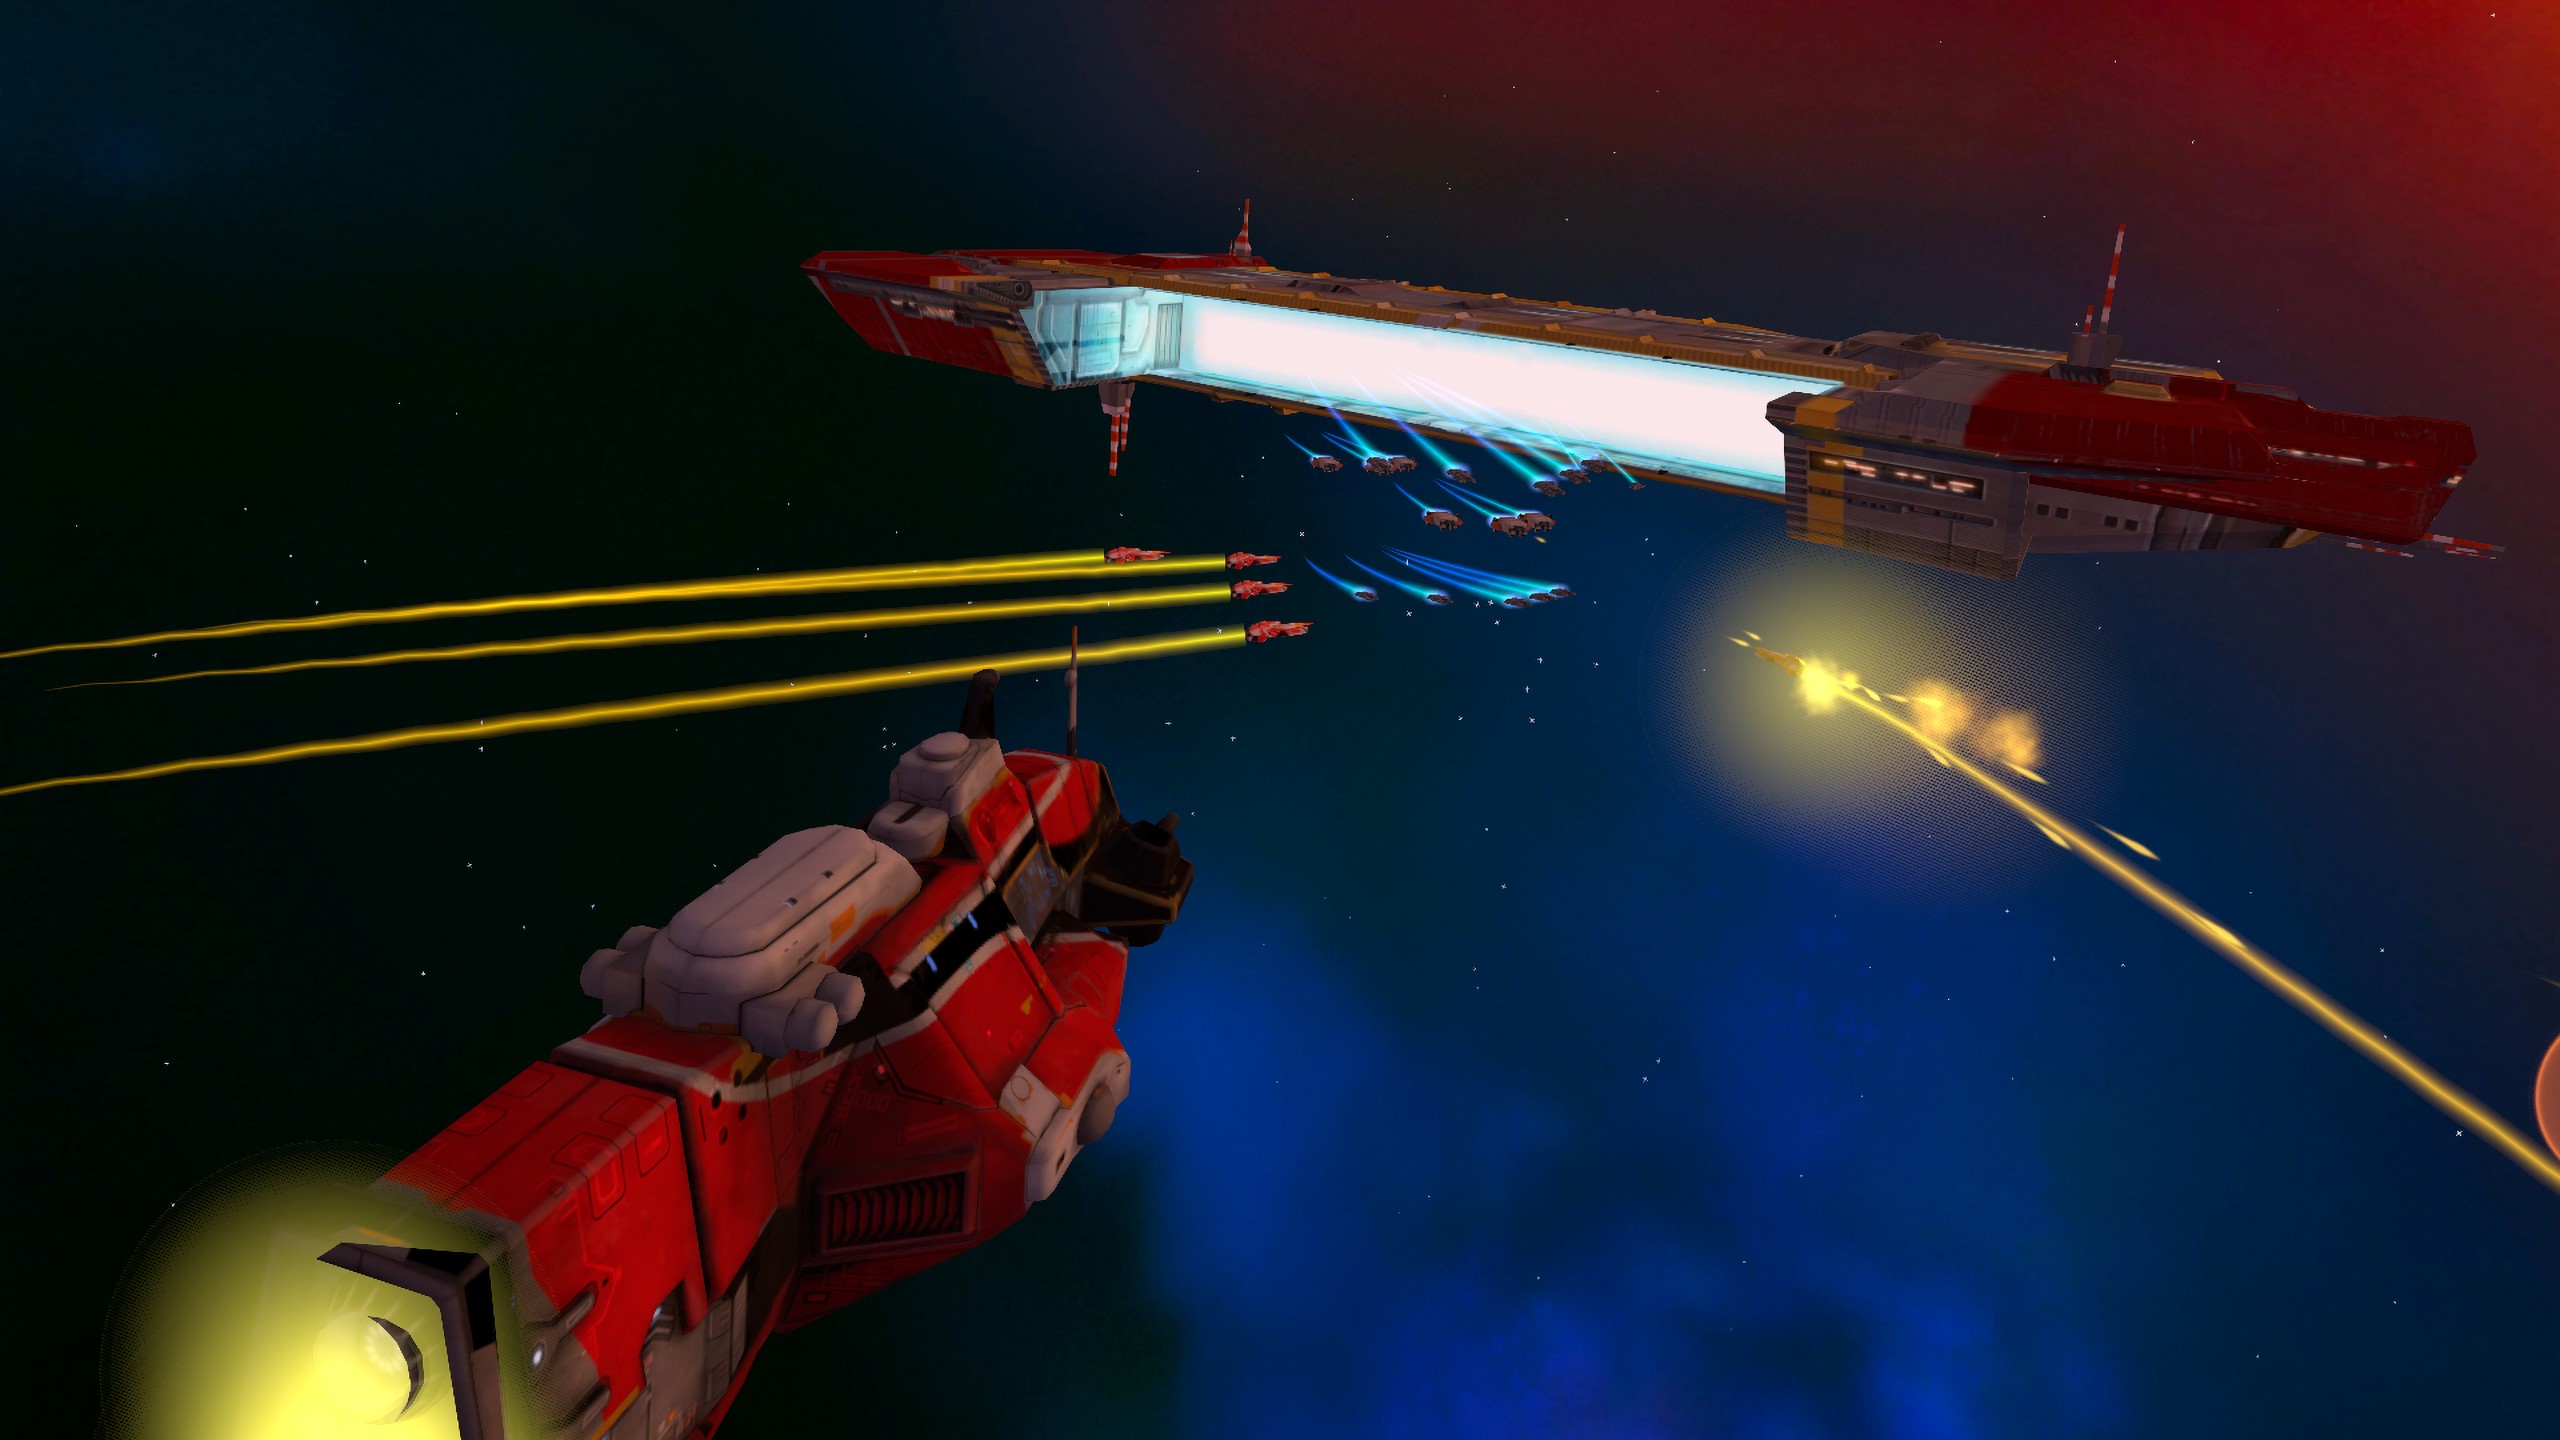 Two fleets fight in Homeworld: Vast Reaches.